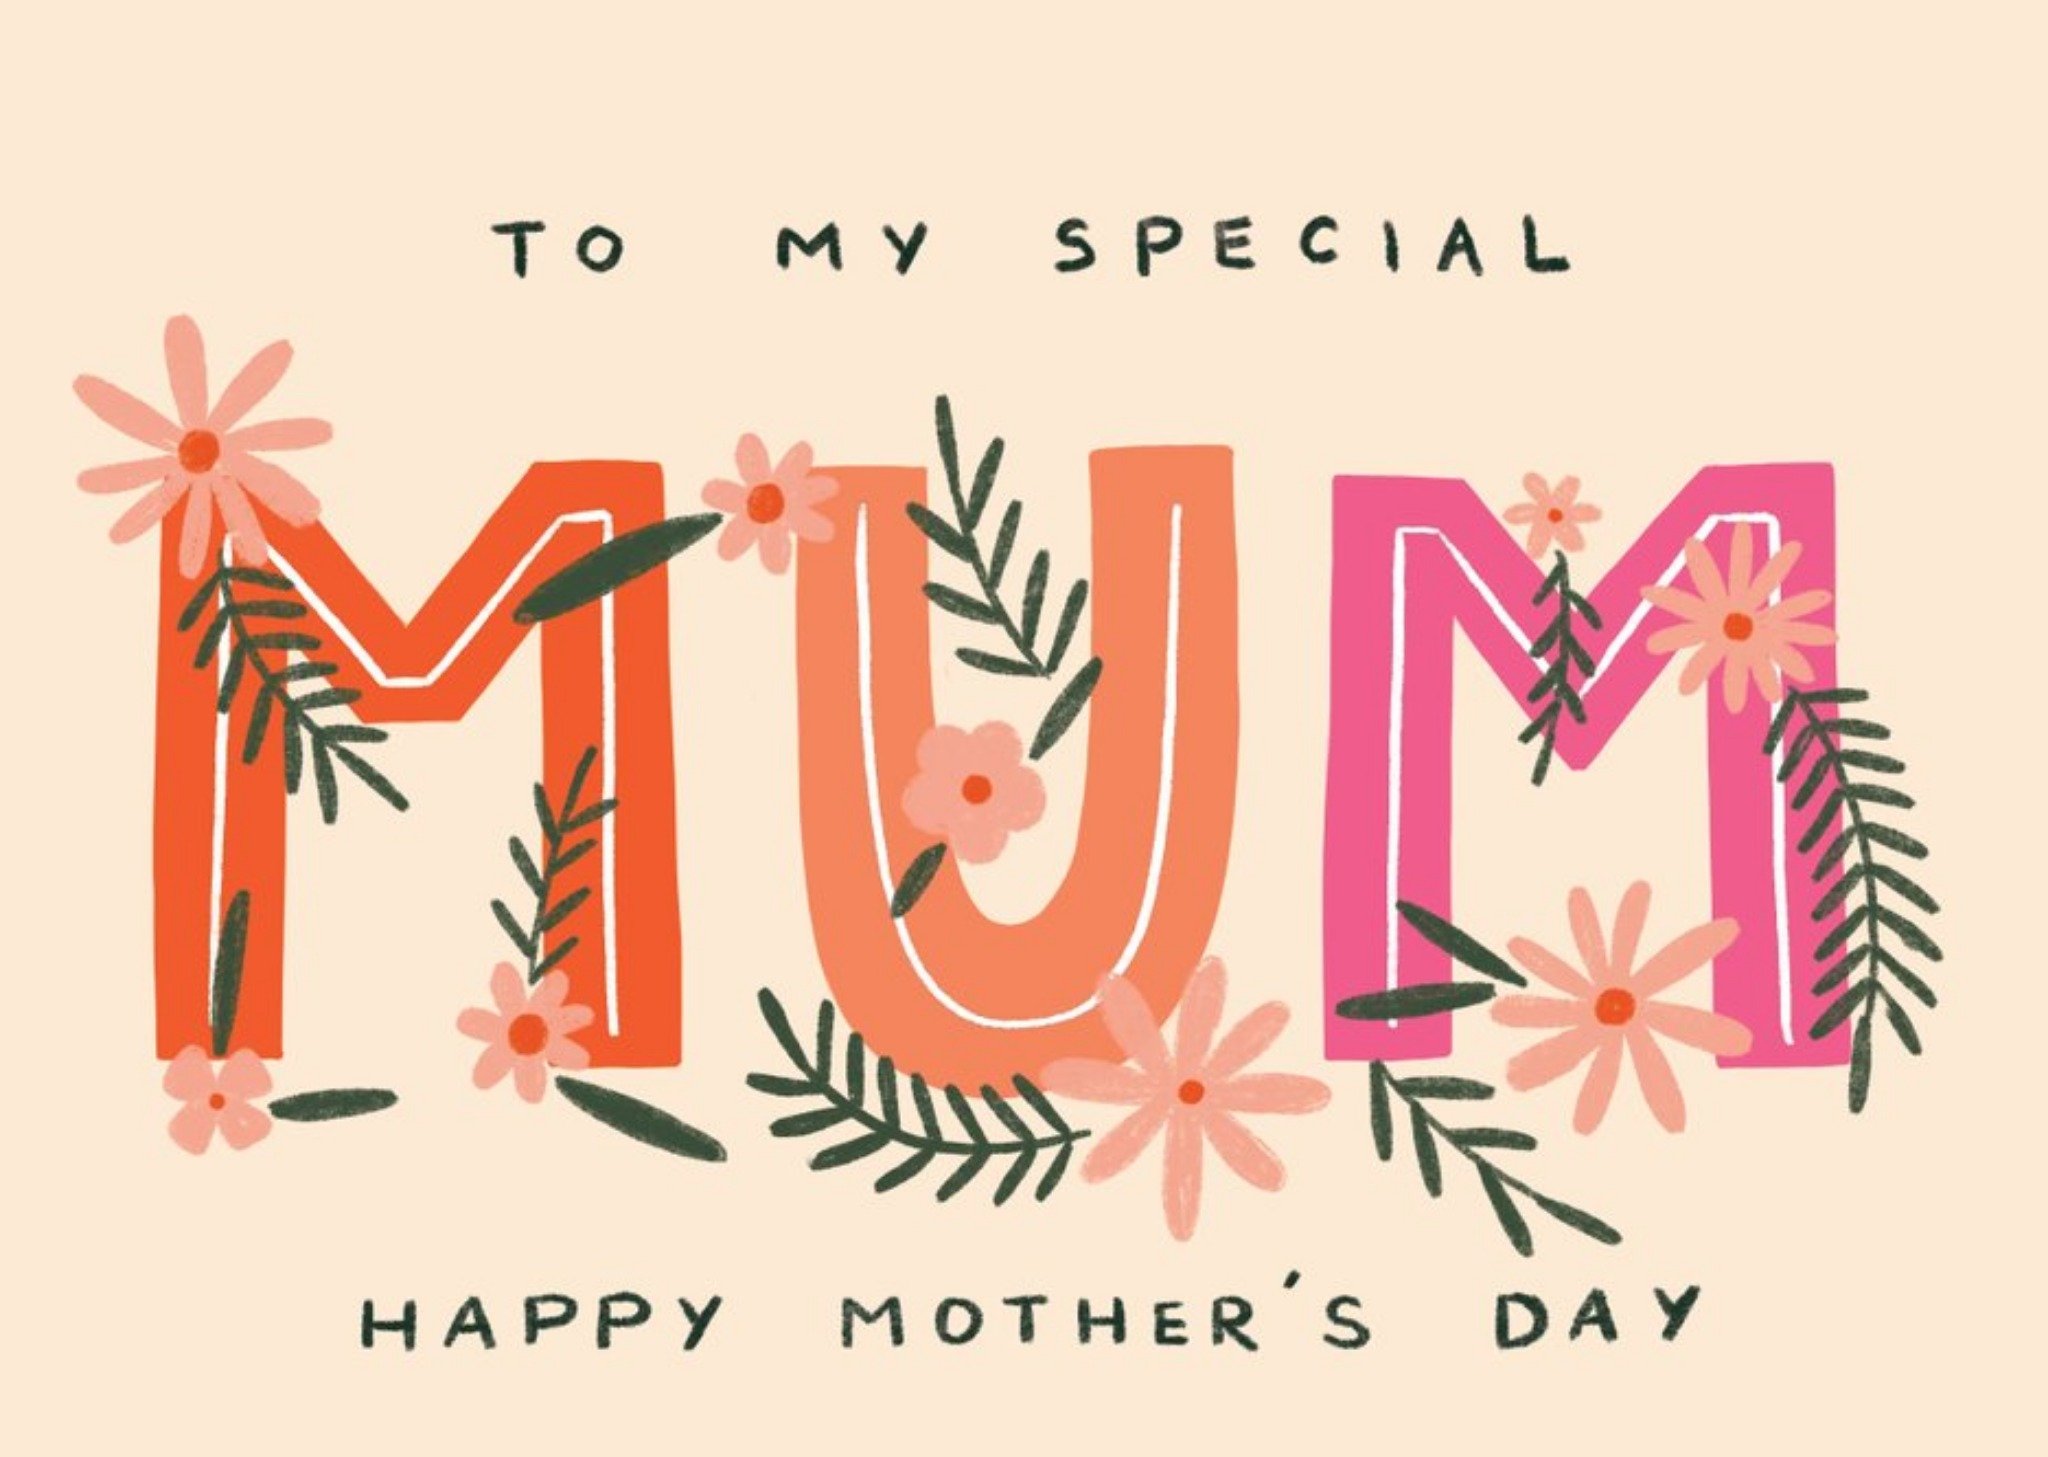 Moonpig To My Special Mum Happy Mother's Day Floral Typographic Card, Large